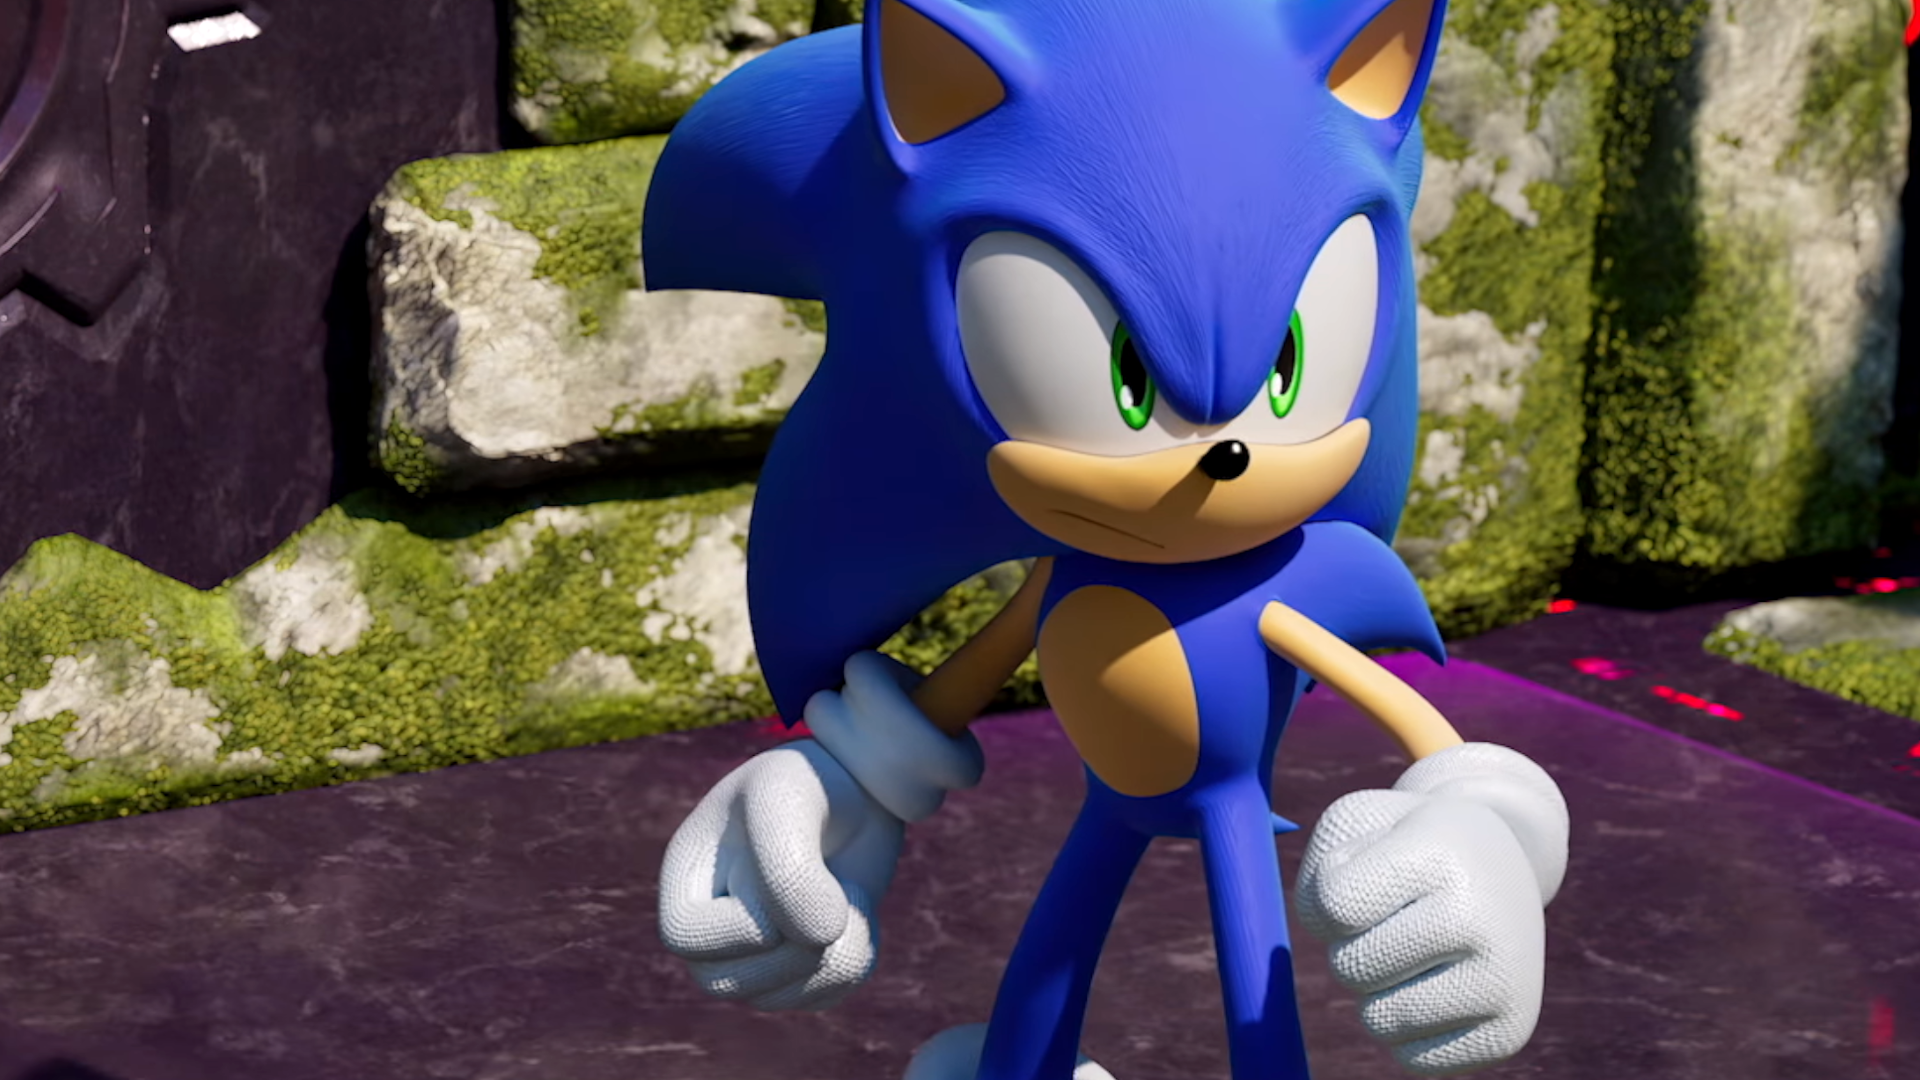 Sonic Team Says 2021 Is The Next Big Year For Sonic - Game Informer